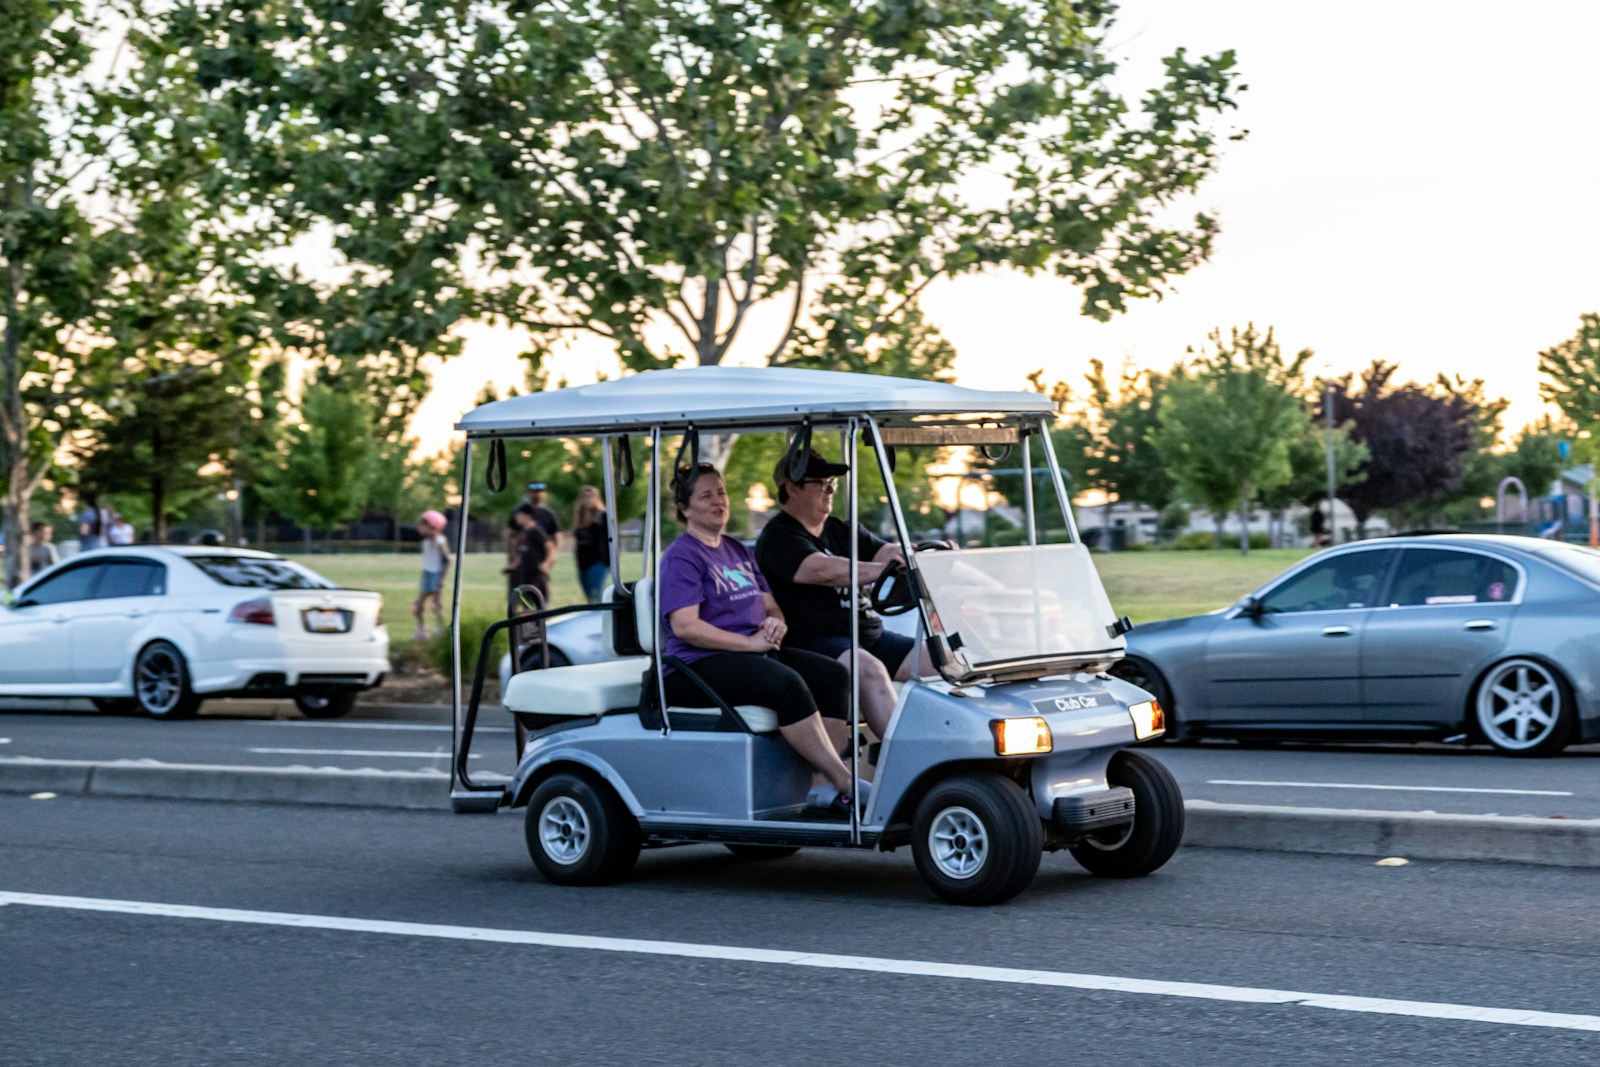 people riding on golf cart during daytime